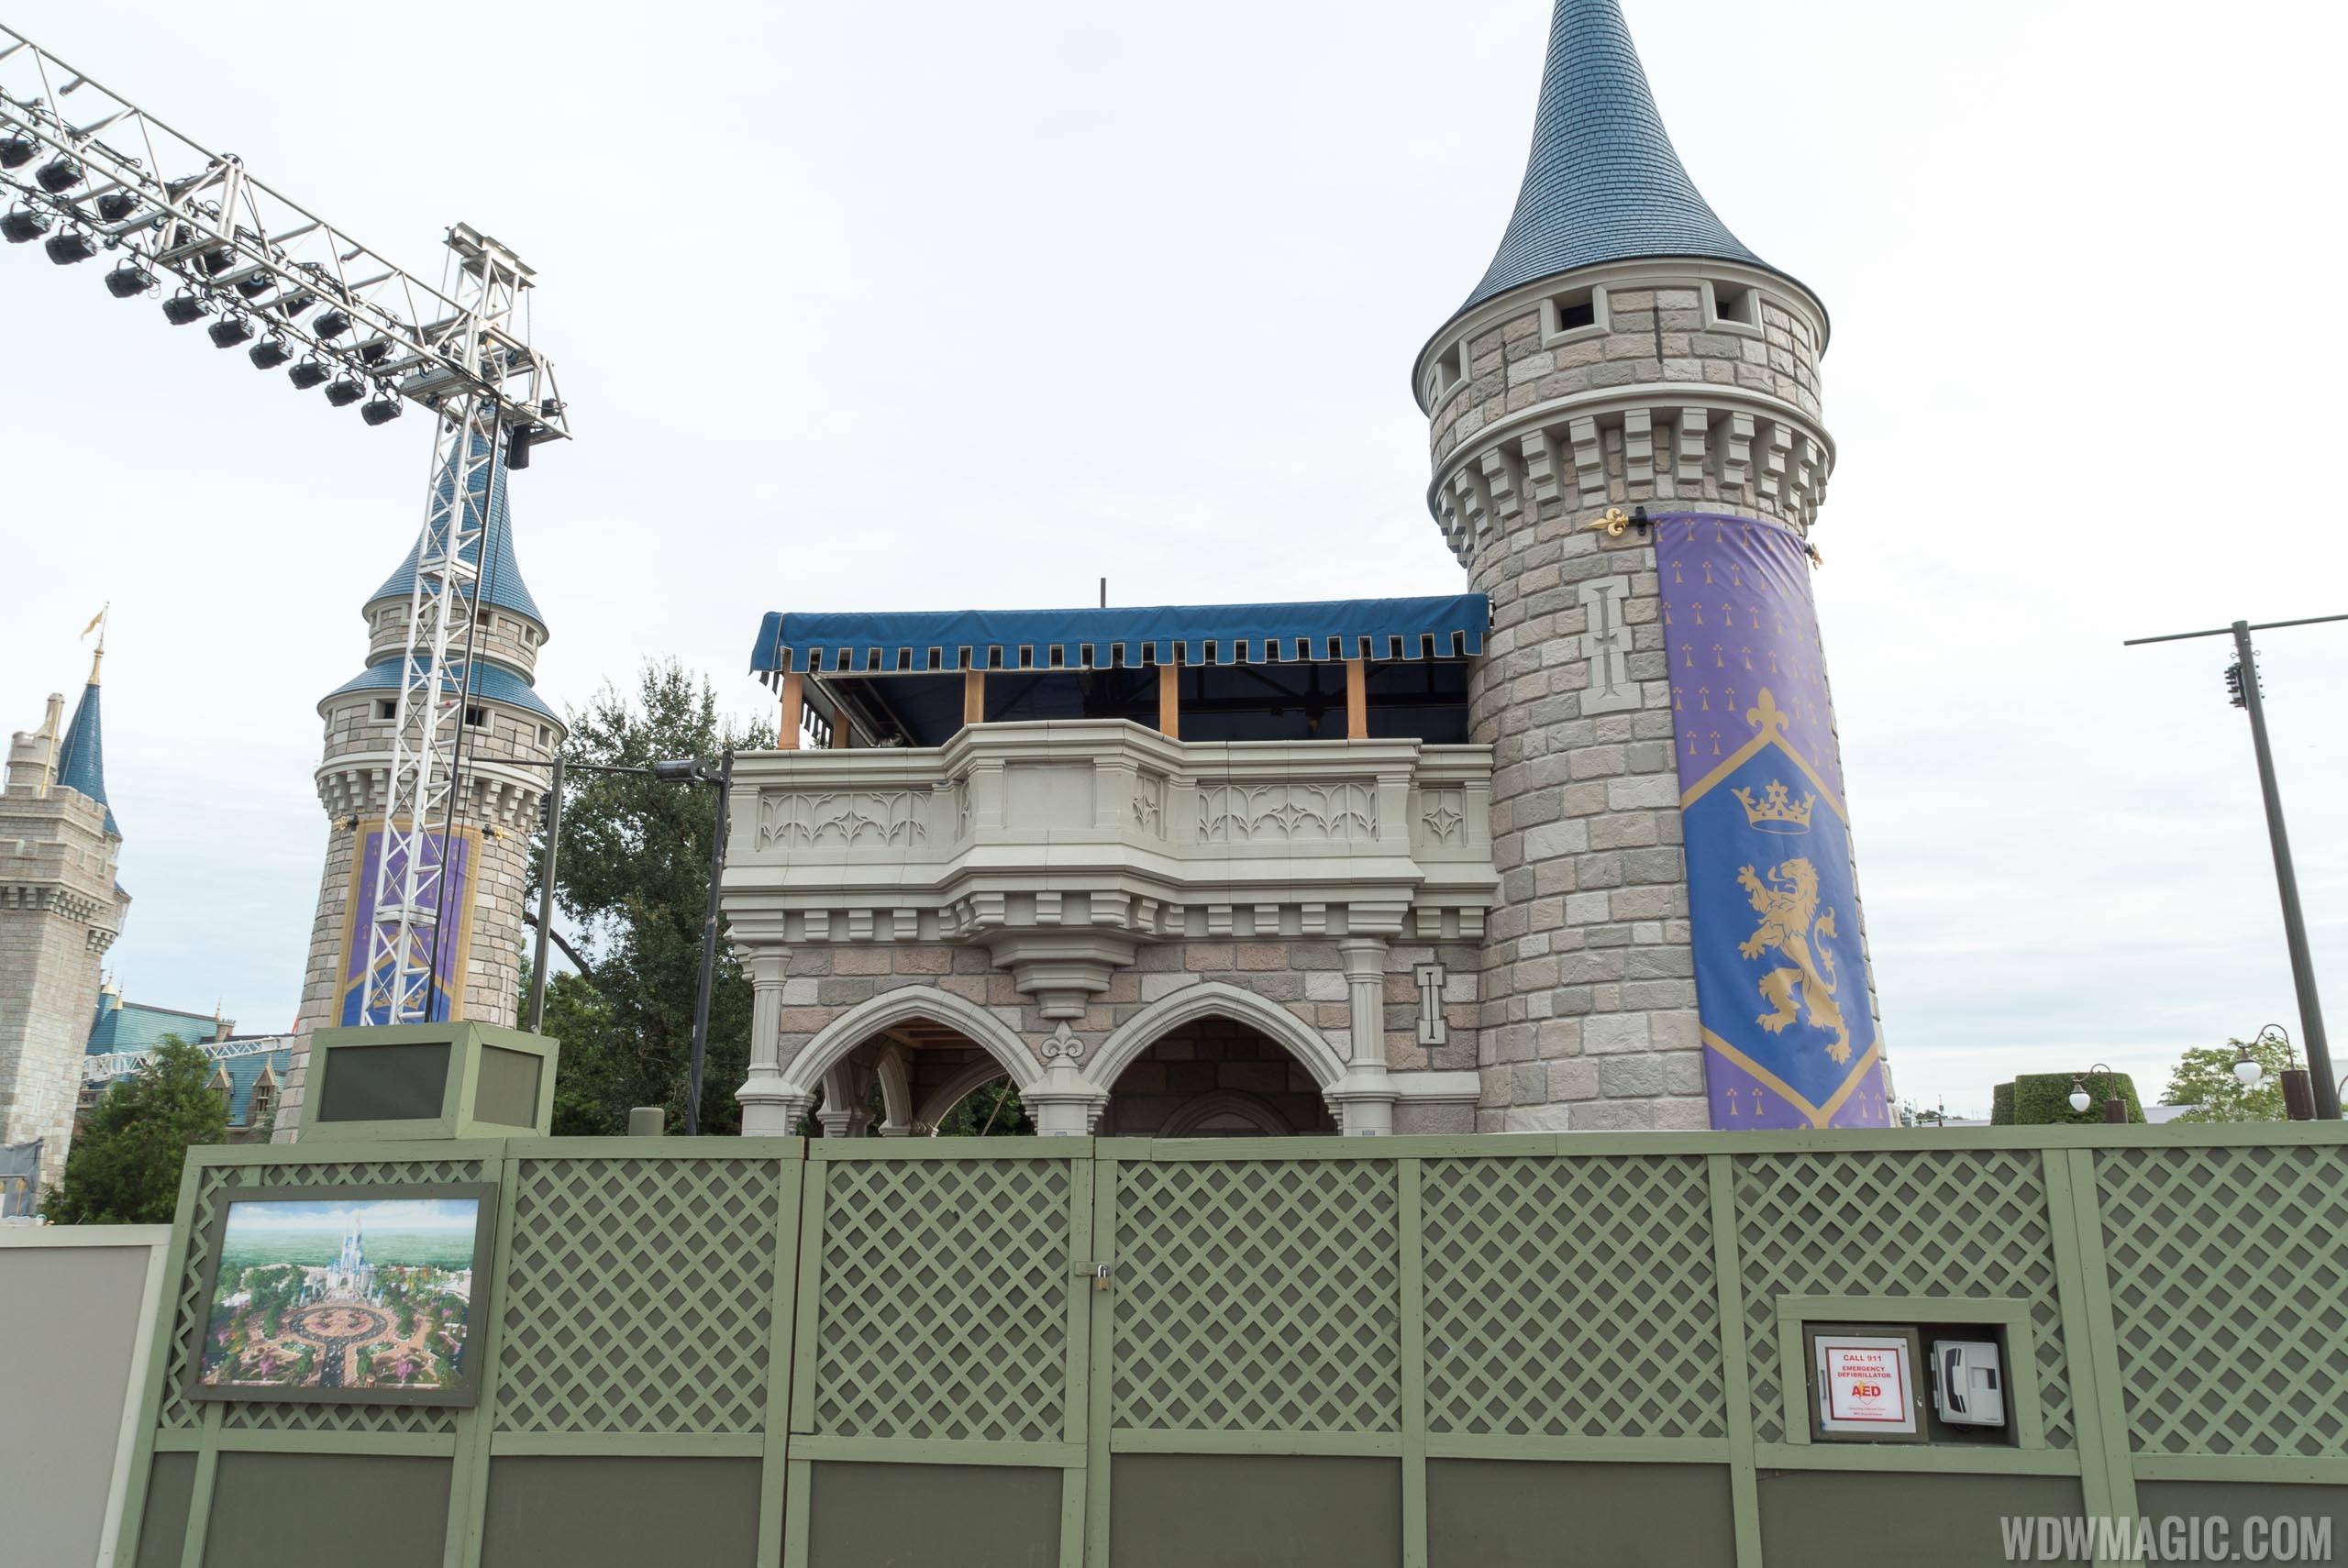 Cinderella Castle turret and forecourt construction